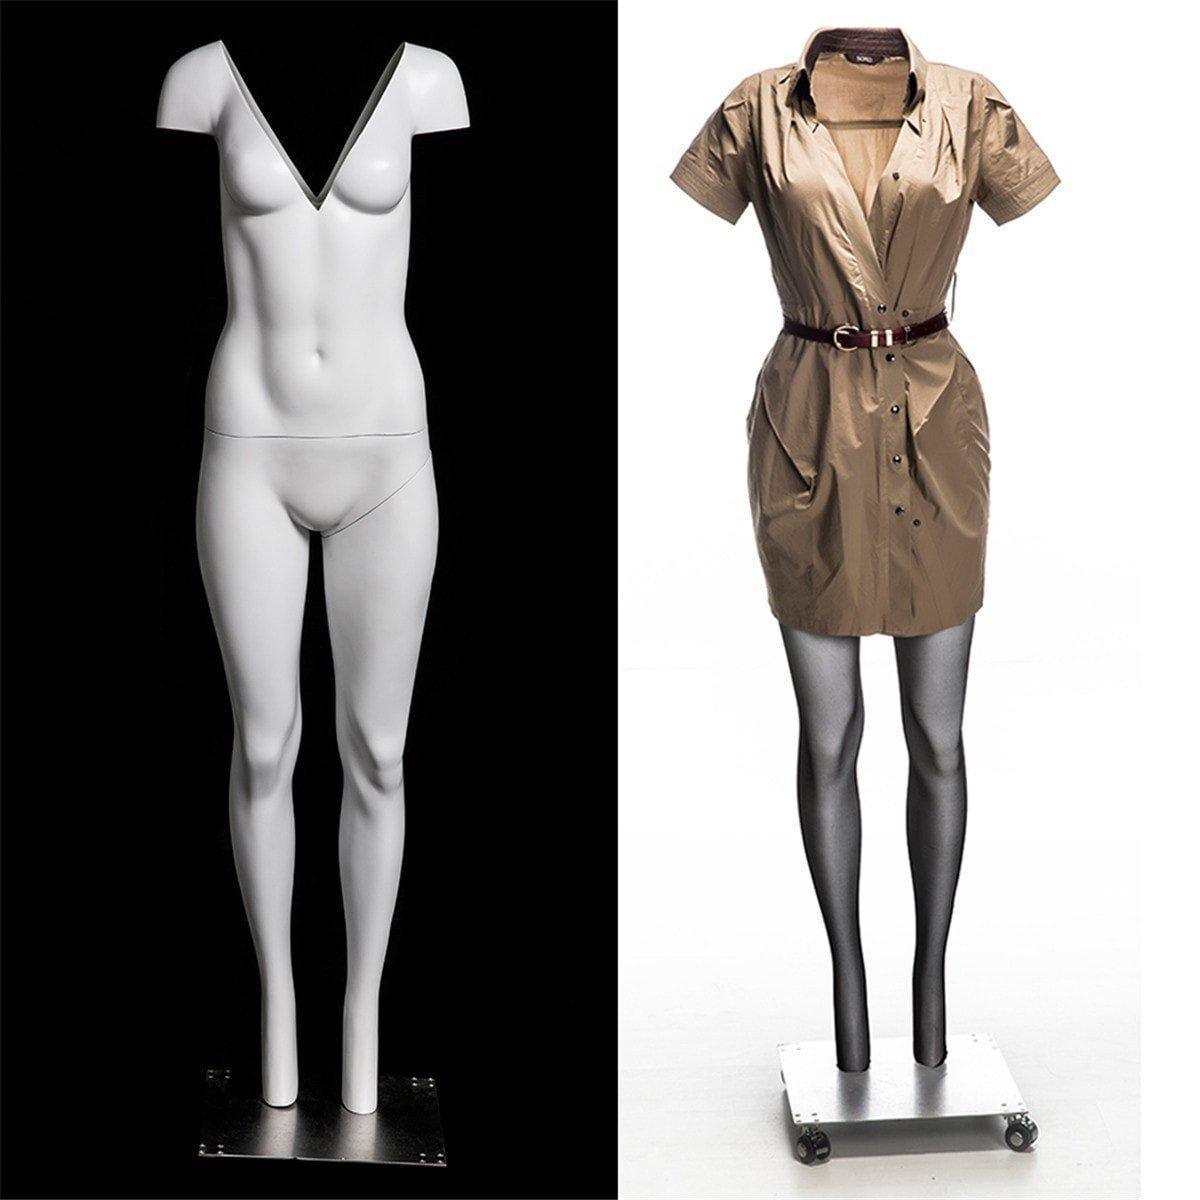 Female Invisible Ghost Mannequin Full Body for Photography (Version 1.0A) MM-MZGH1 - Mannequin Mall